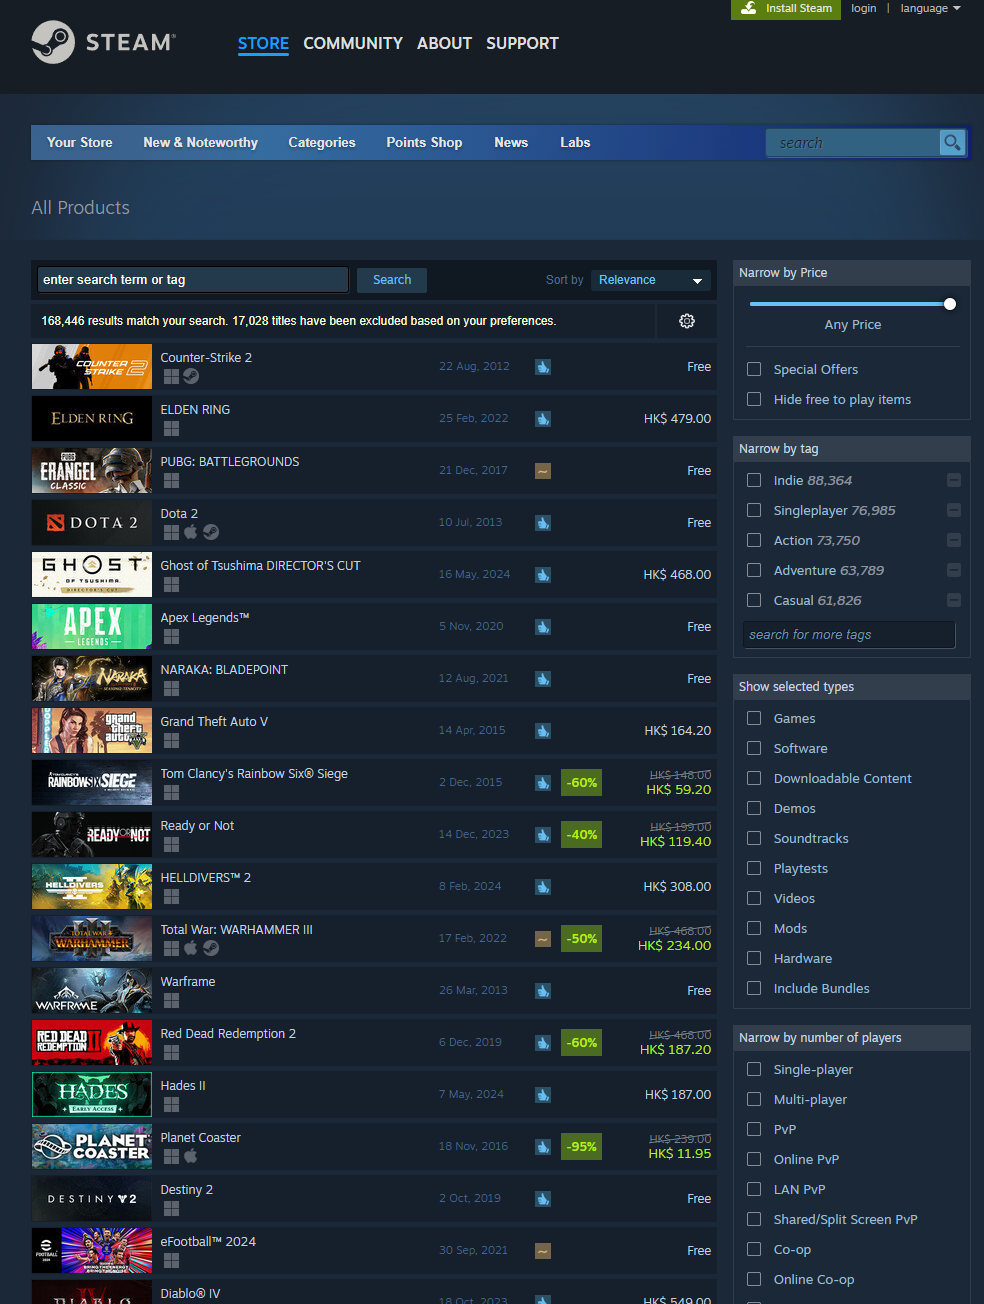 The search page of Steam,, with URL https://store.steampowered.com/search/?term=